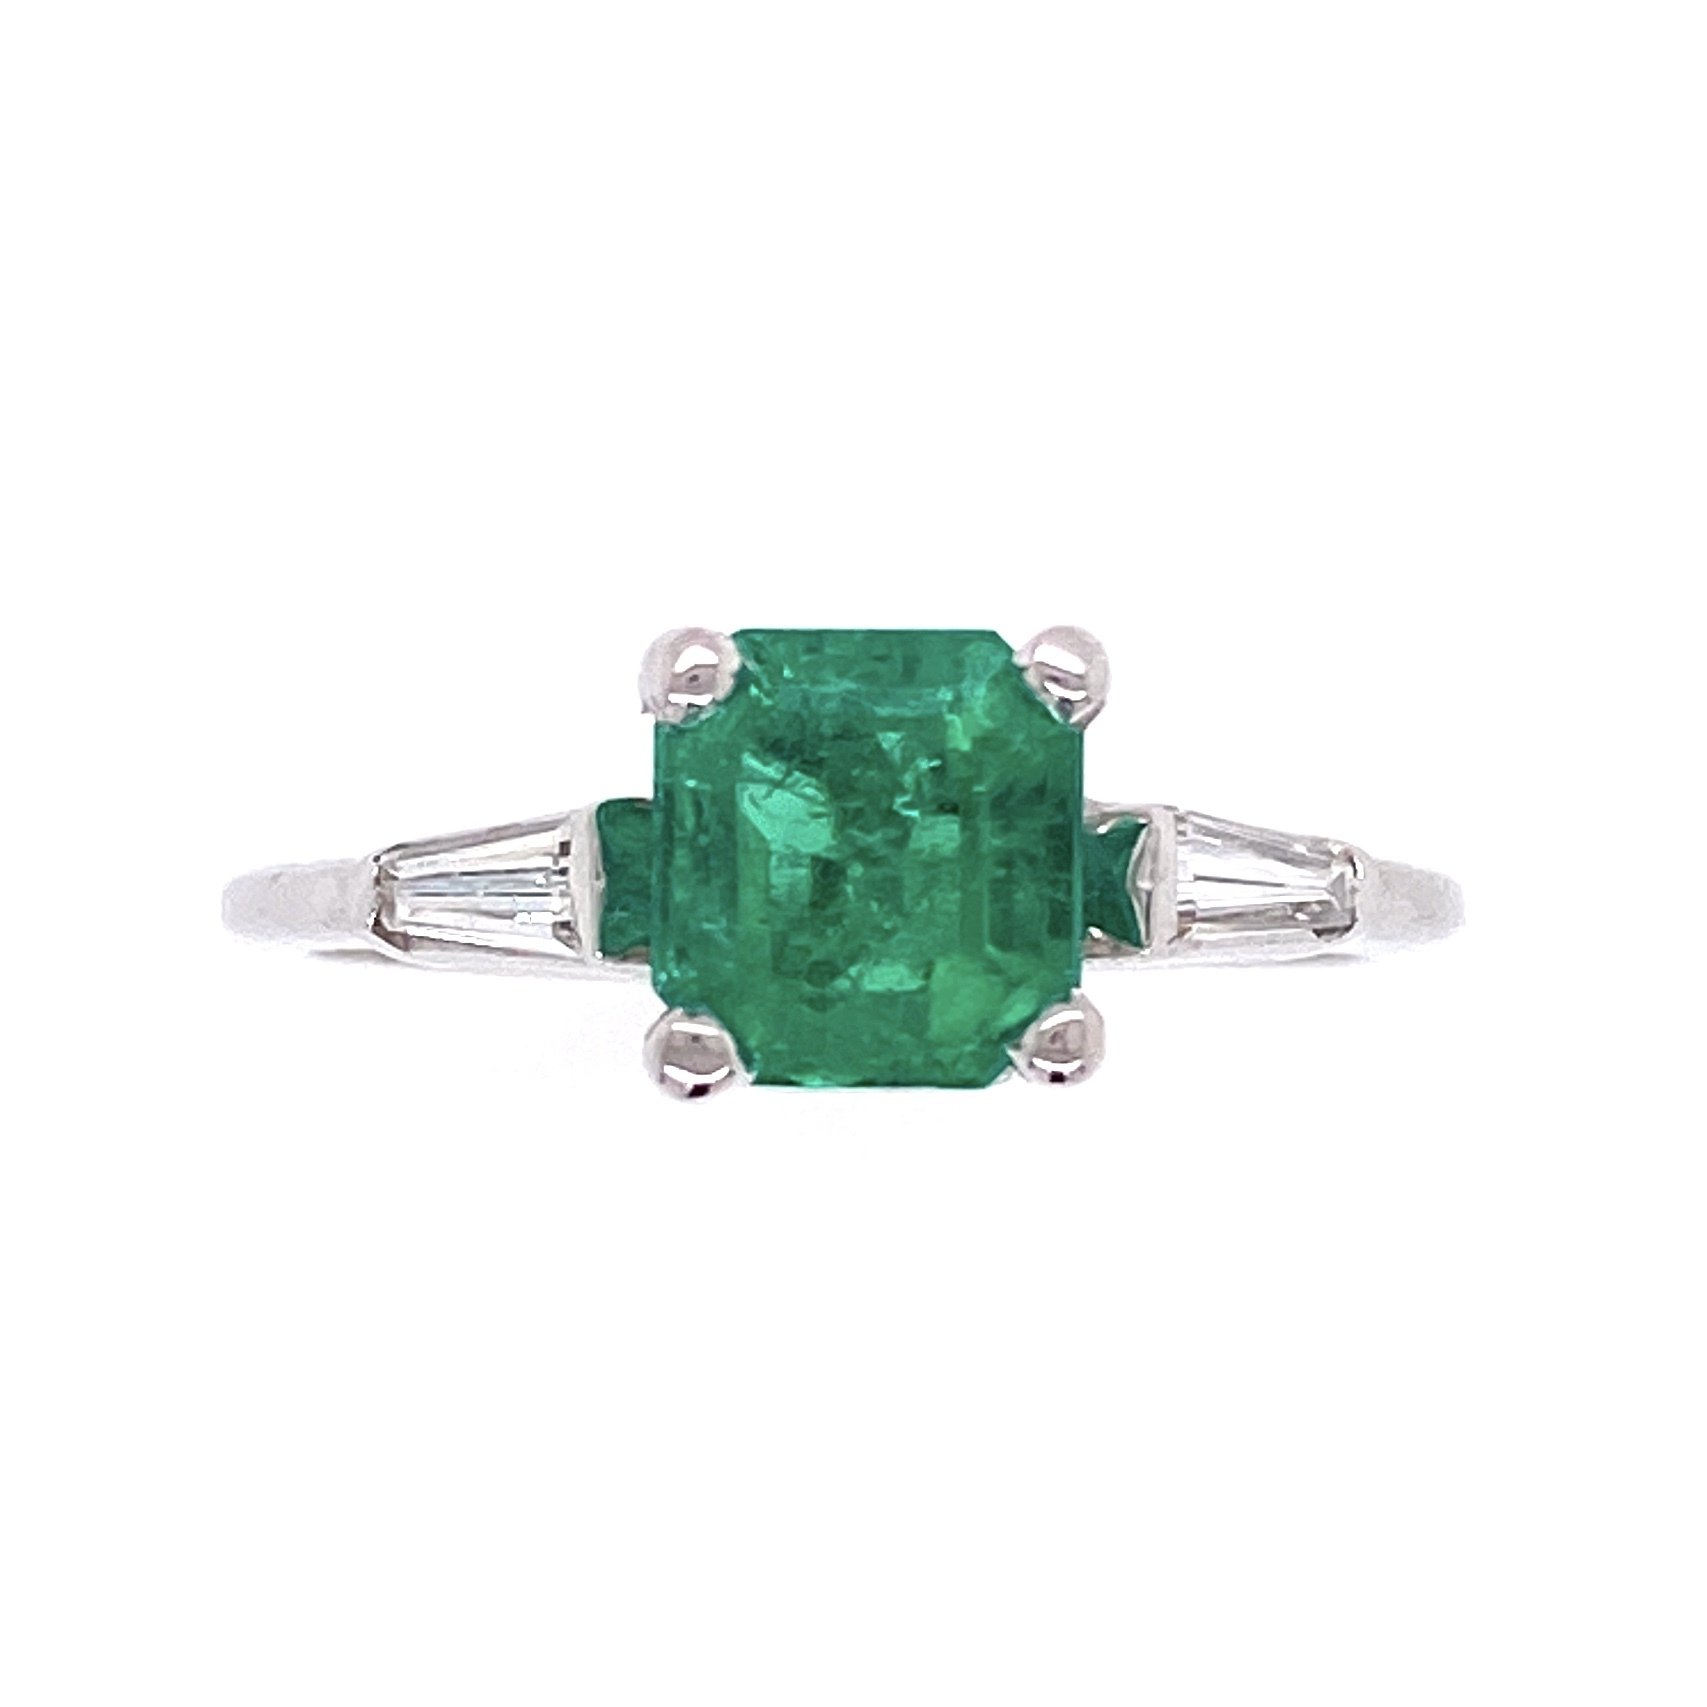 18K White Gold .99ct Square Emerald with 2 tapered baguettes Ring .10tcw 2.2g, s5.25